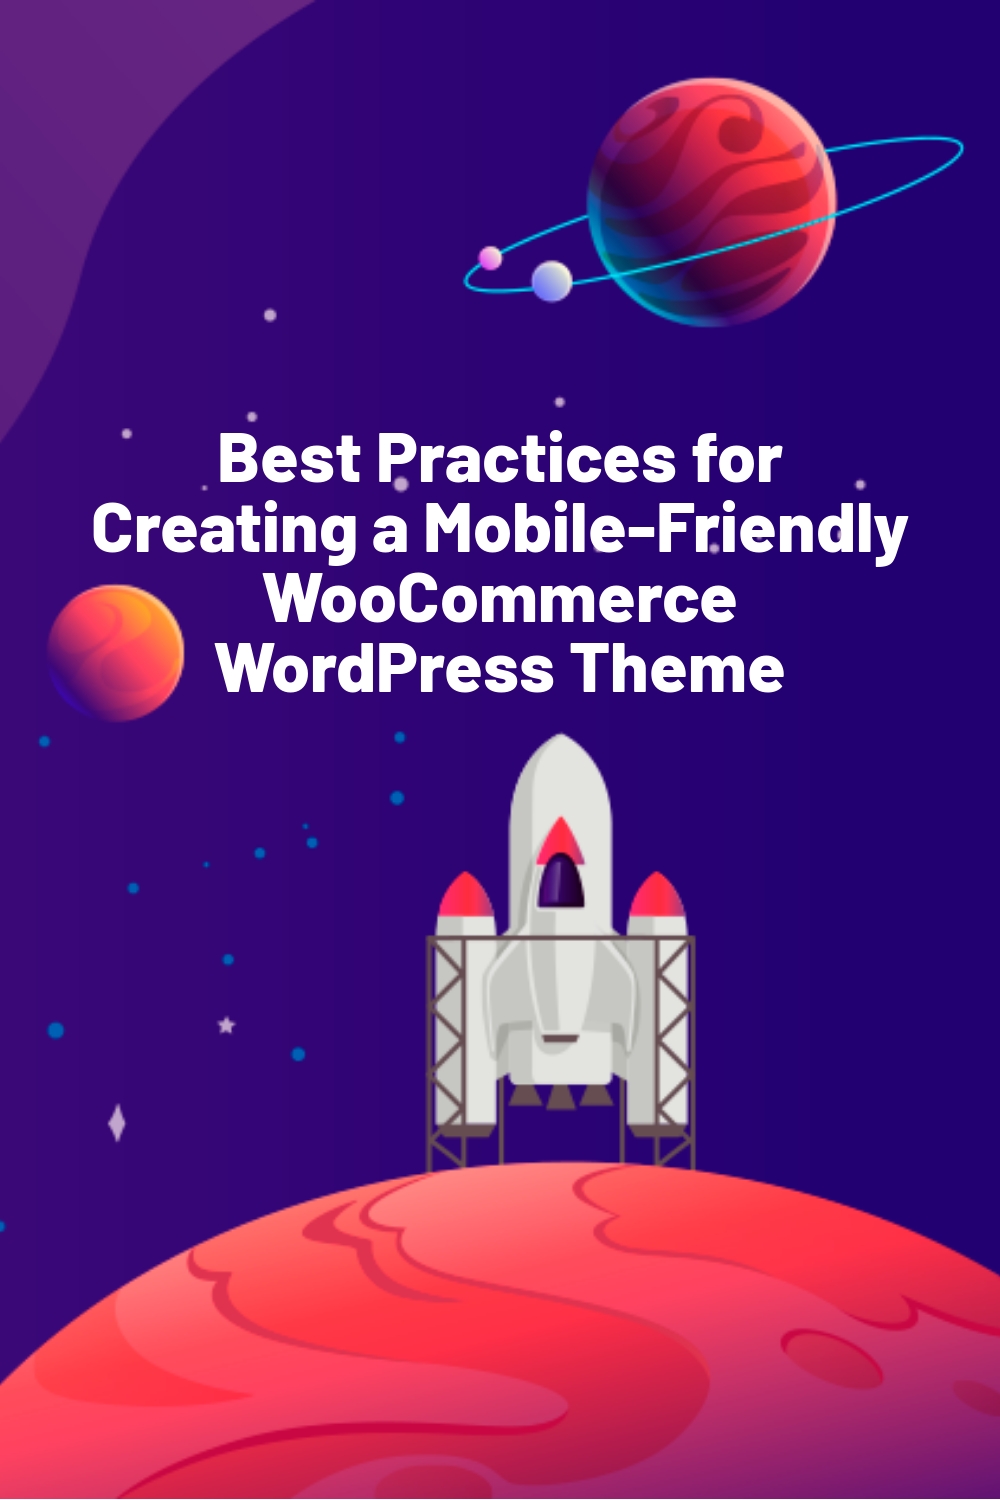 Best Practices for Creating a Mobile-Friendly WooCommerce WordPress Theme